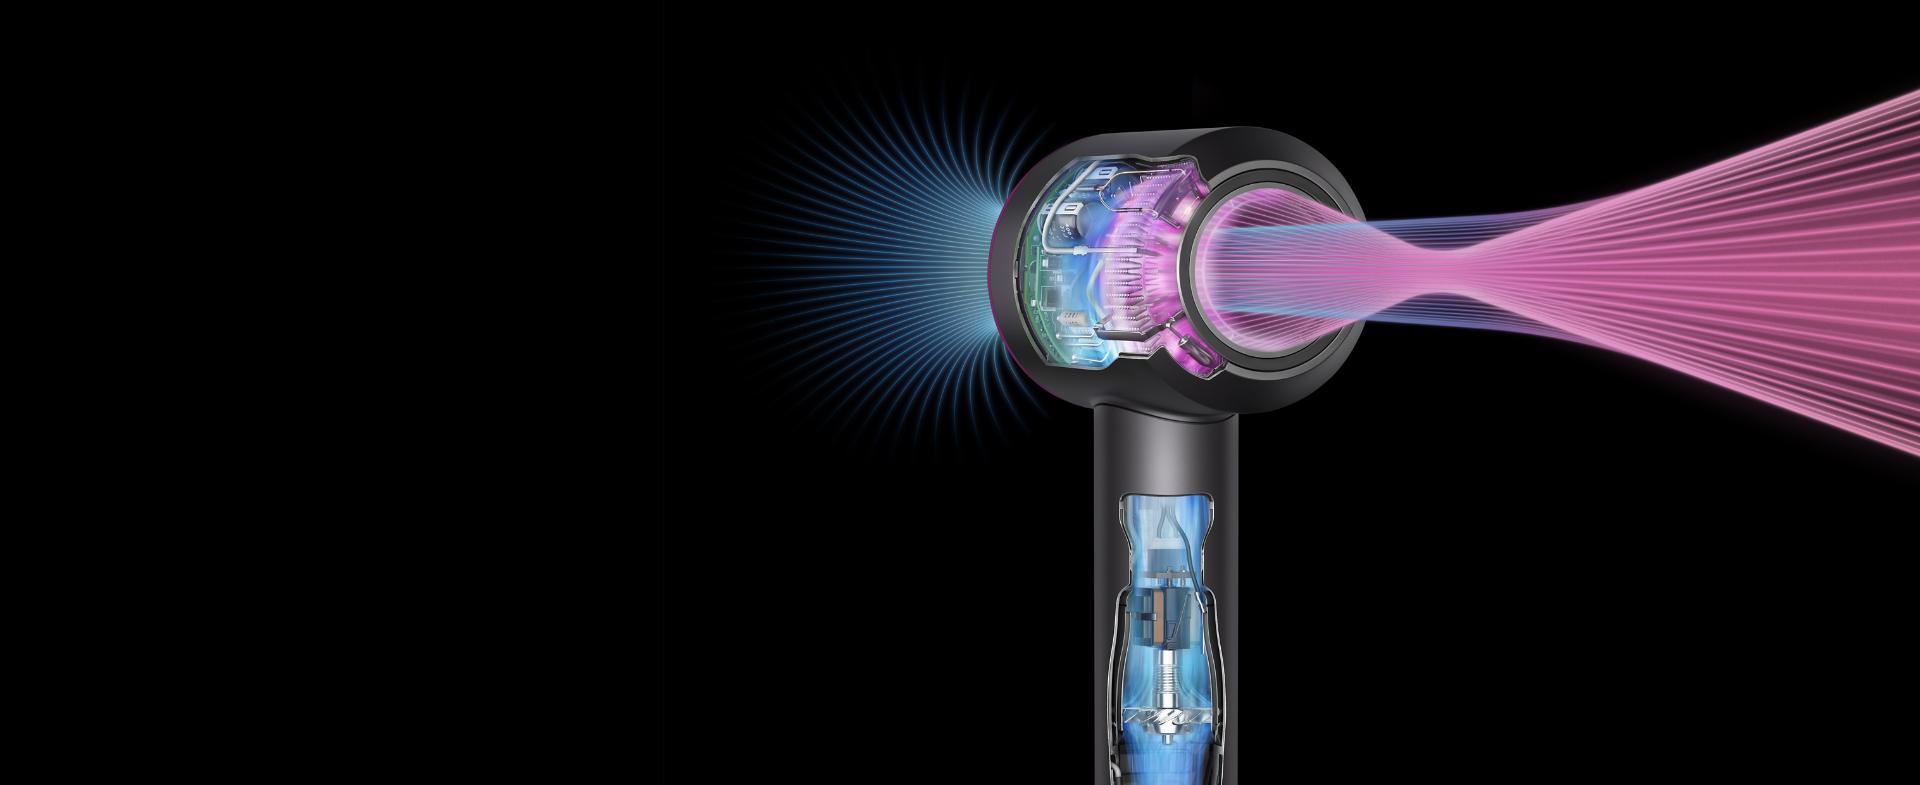 X-ray of the technology found inside the Dyson Supersonic hair dryer